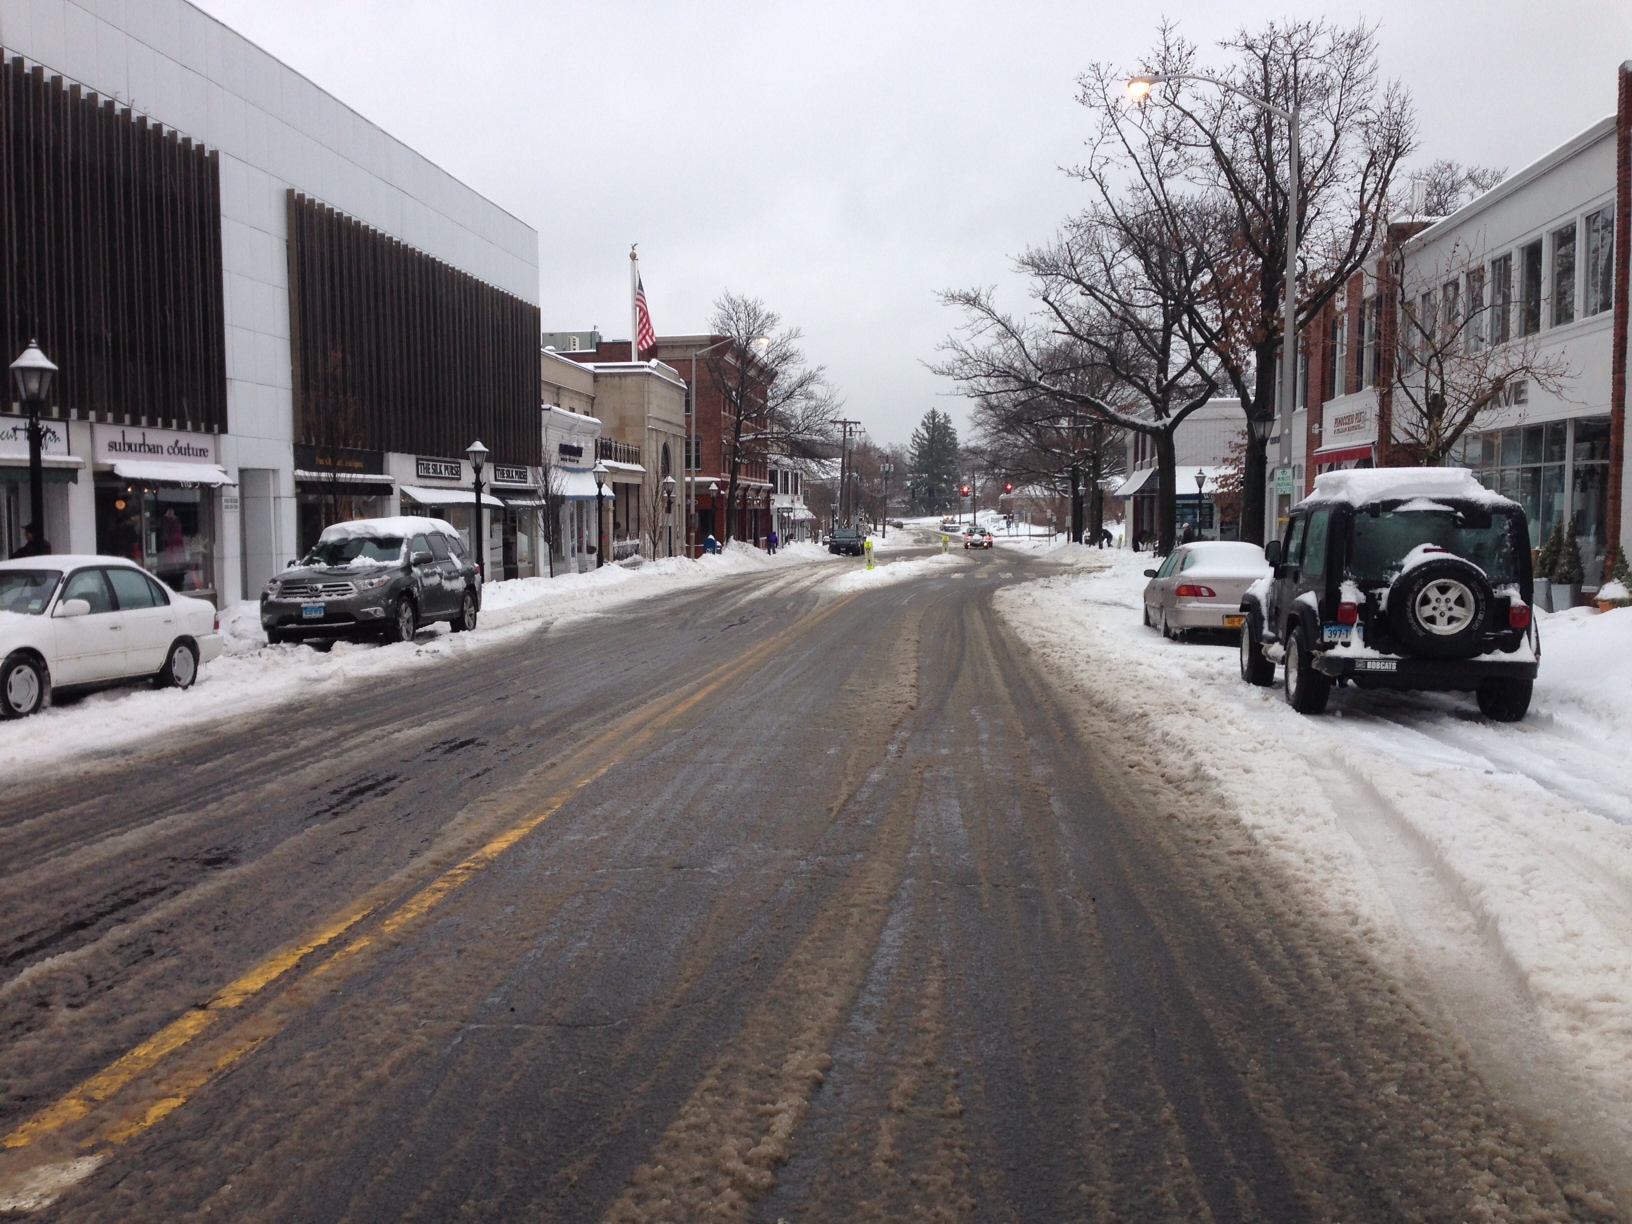 Downtown New Canaan during the snow and sleet storm of Feb. 5, 2104. Credit: Terry Dinan